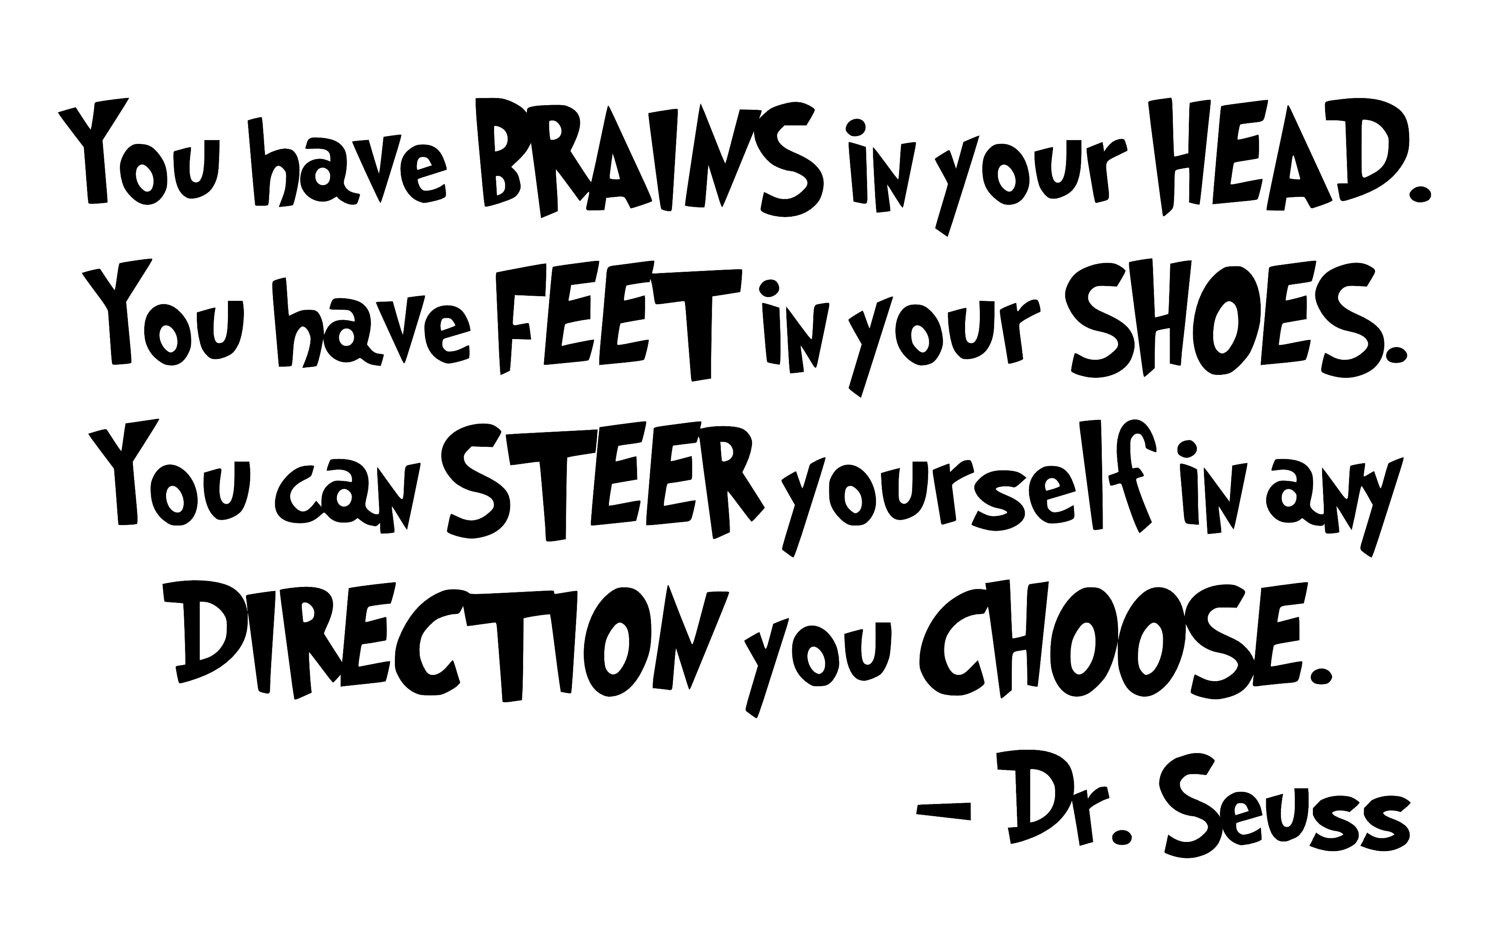 Dr Seuss Inspirational Quotes
 From Dr Seuss Quotes QuotesGram